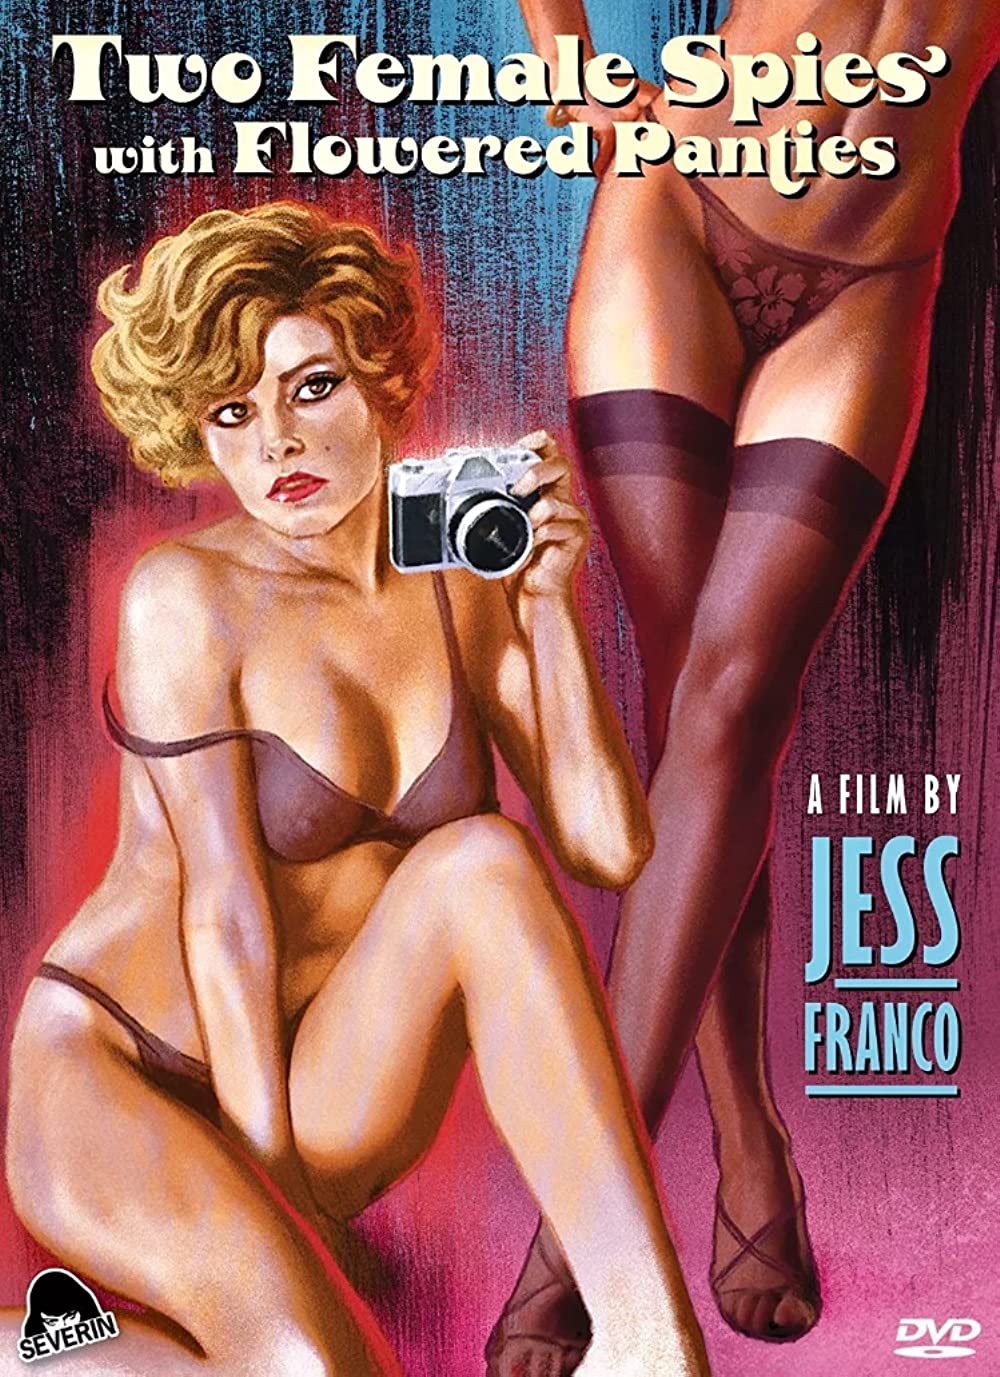 Two Female Spies with Flowered Panties (1980) - Original Poster - vintagepornfun.com